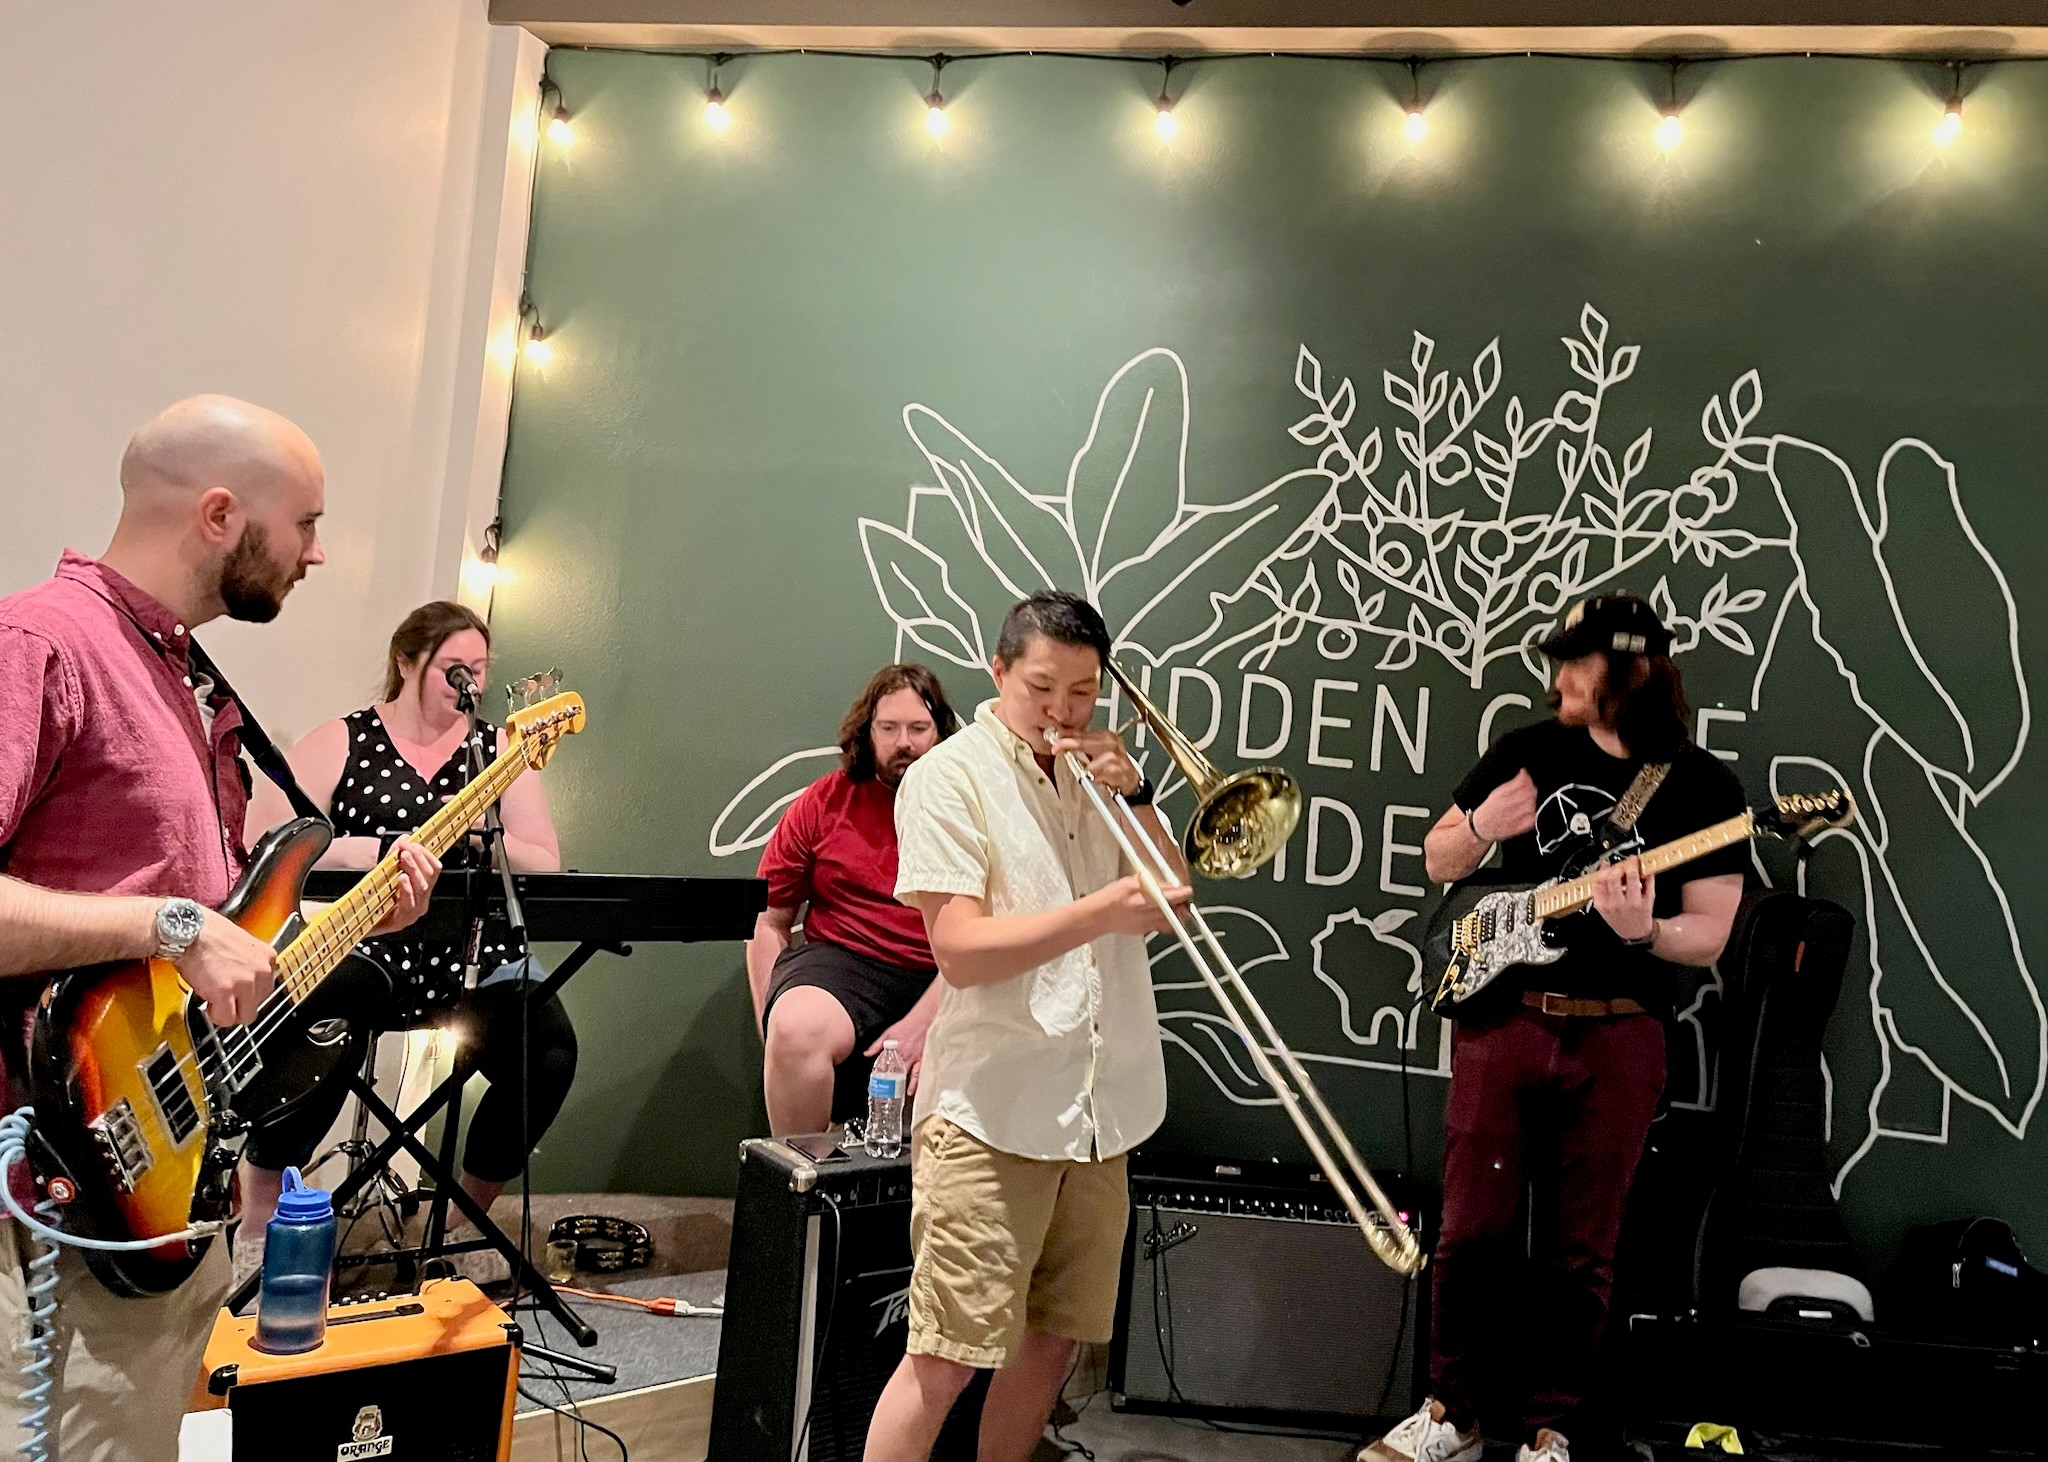 A group of people playing music in front of a chalkboard.